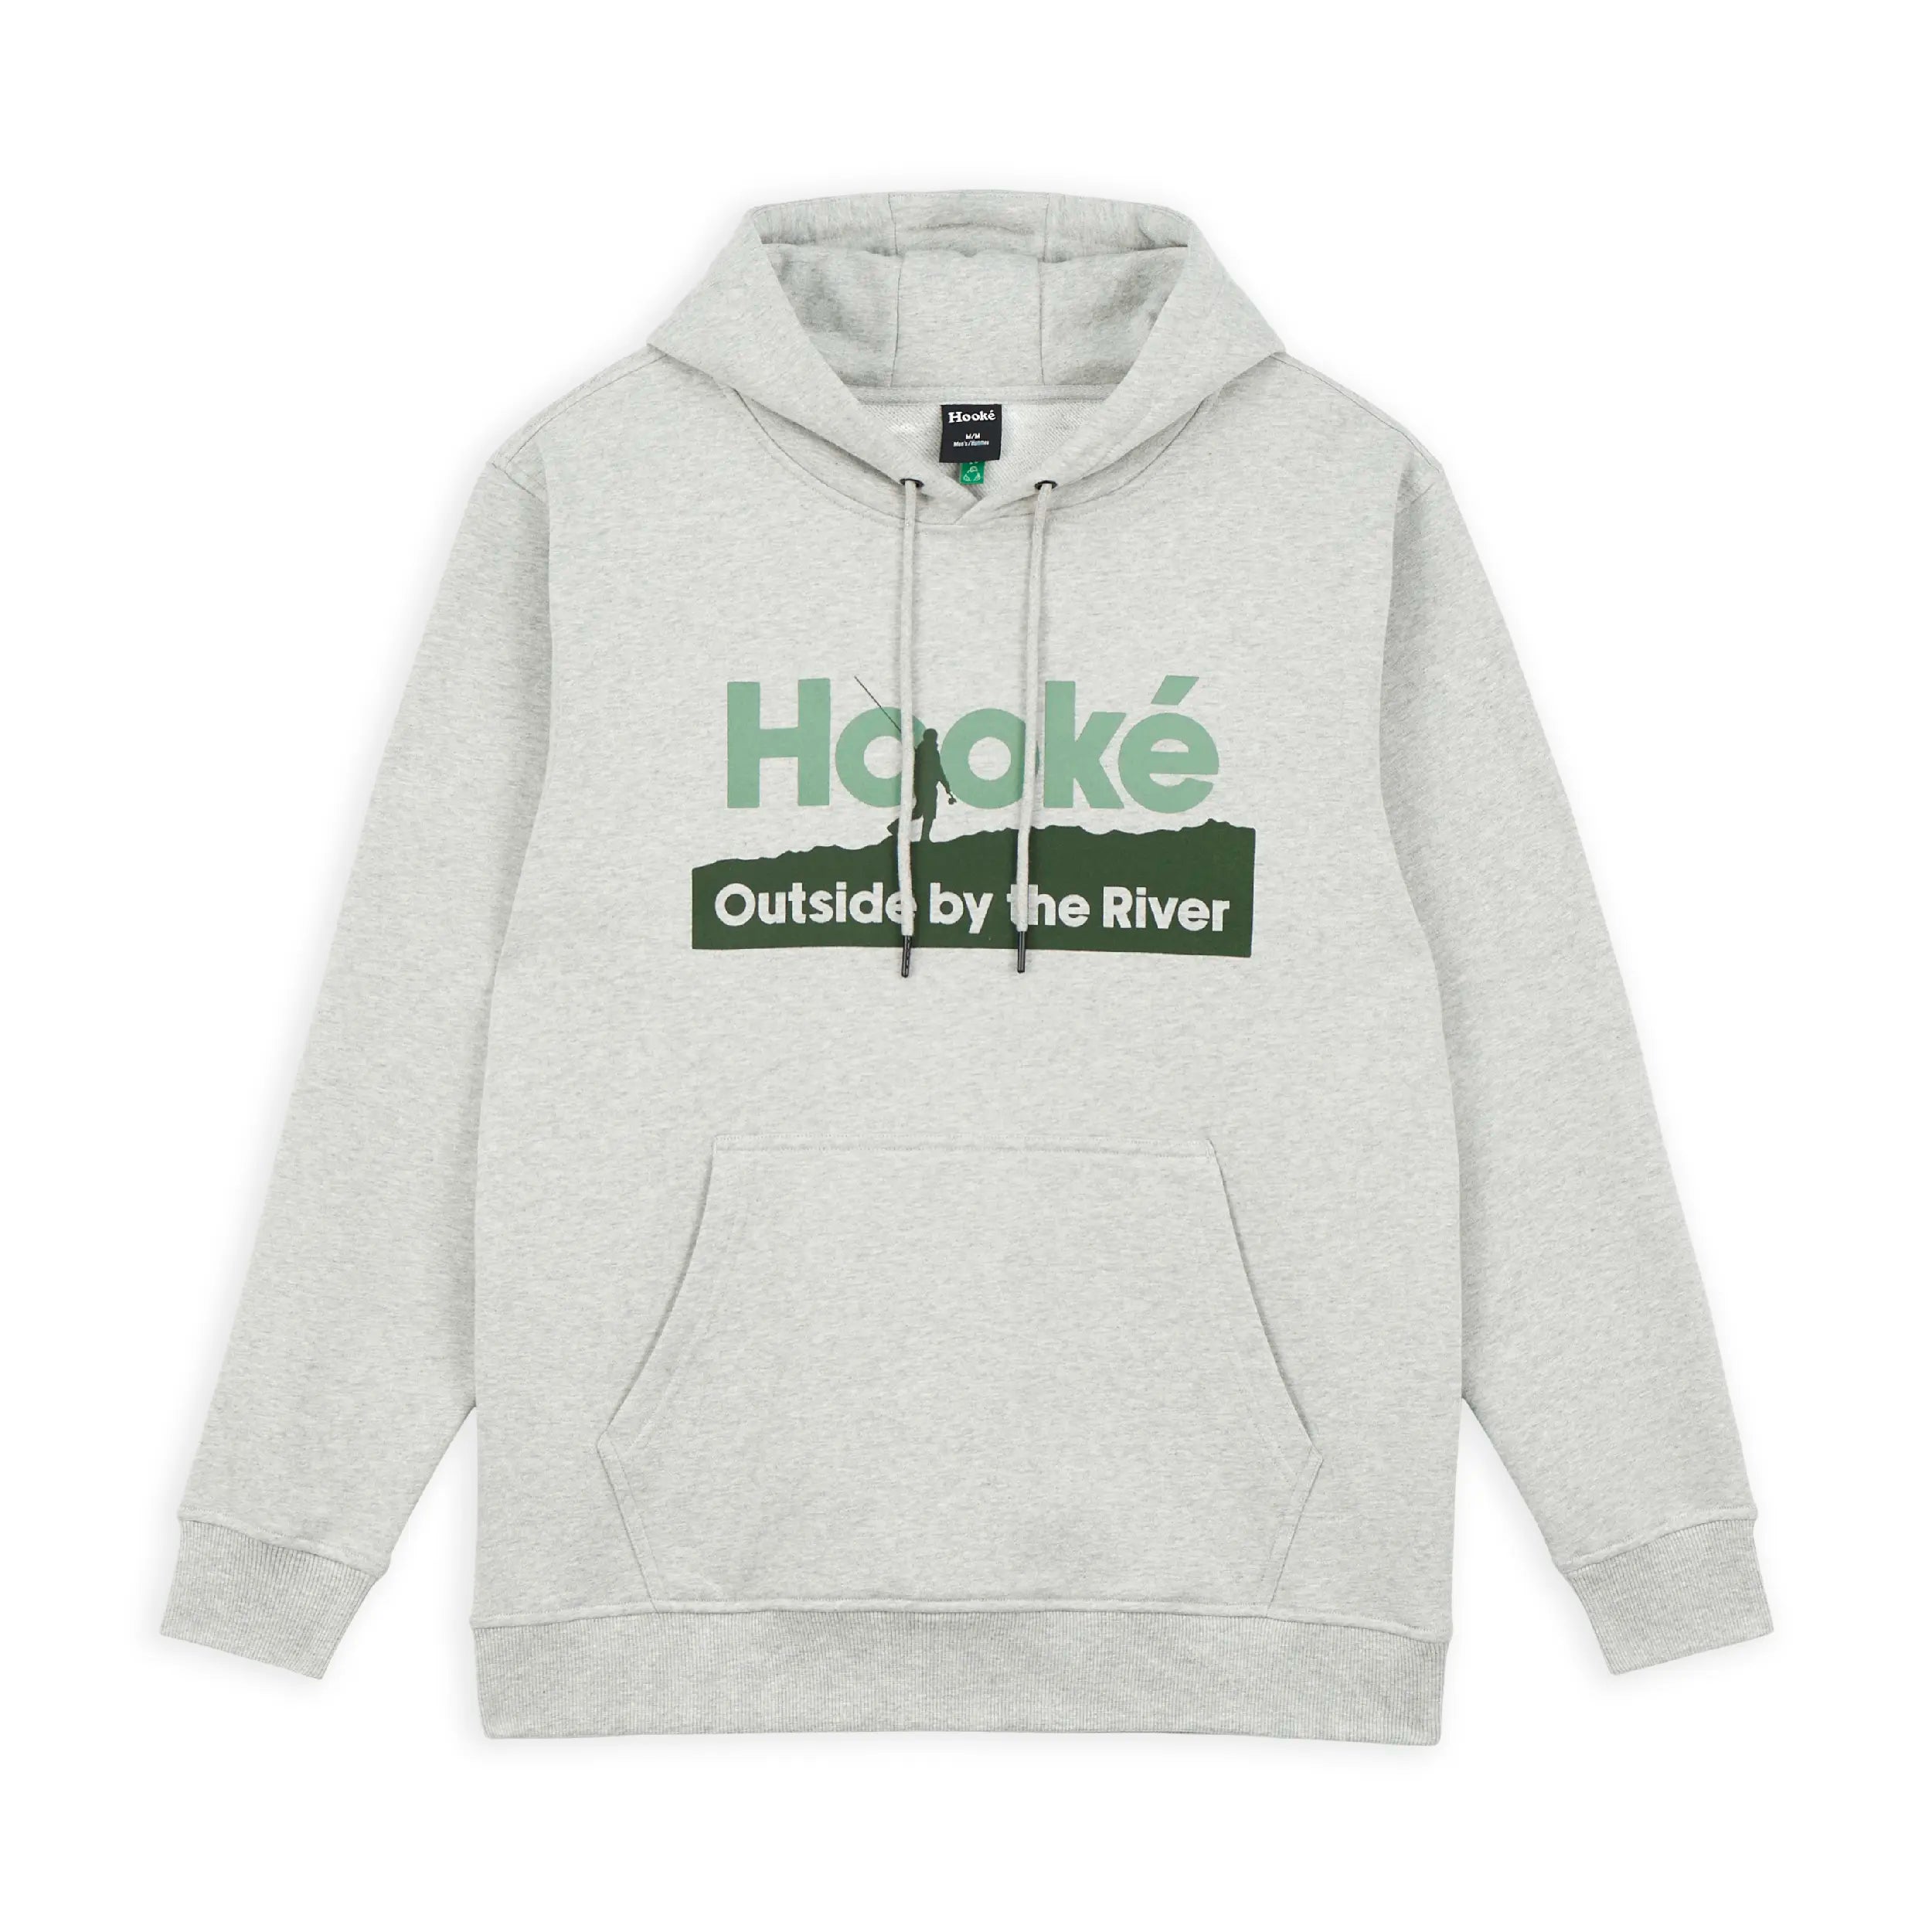 M's Outside by the River Hoodie - Hooké